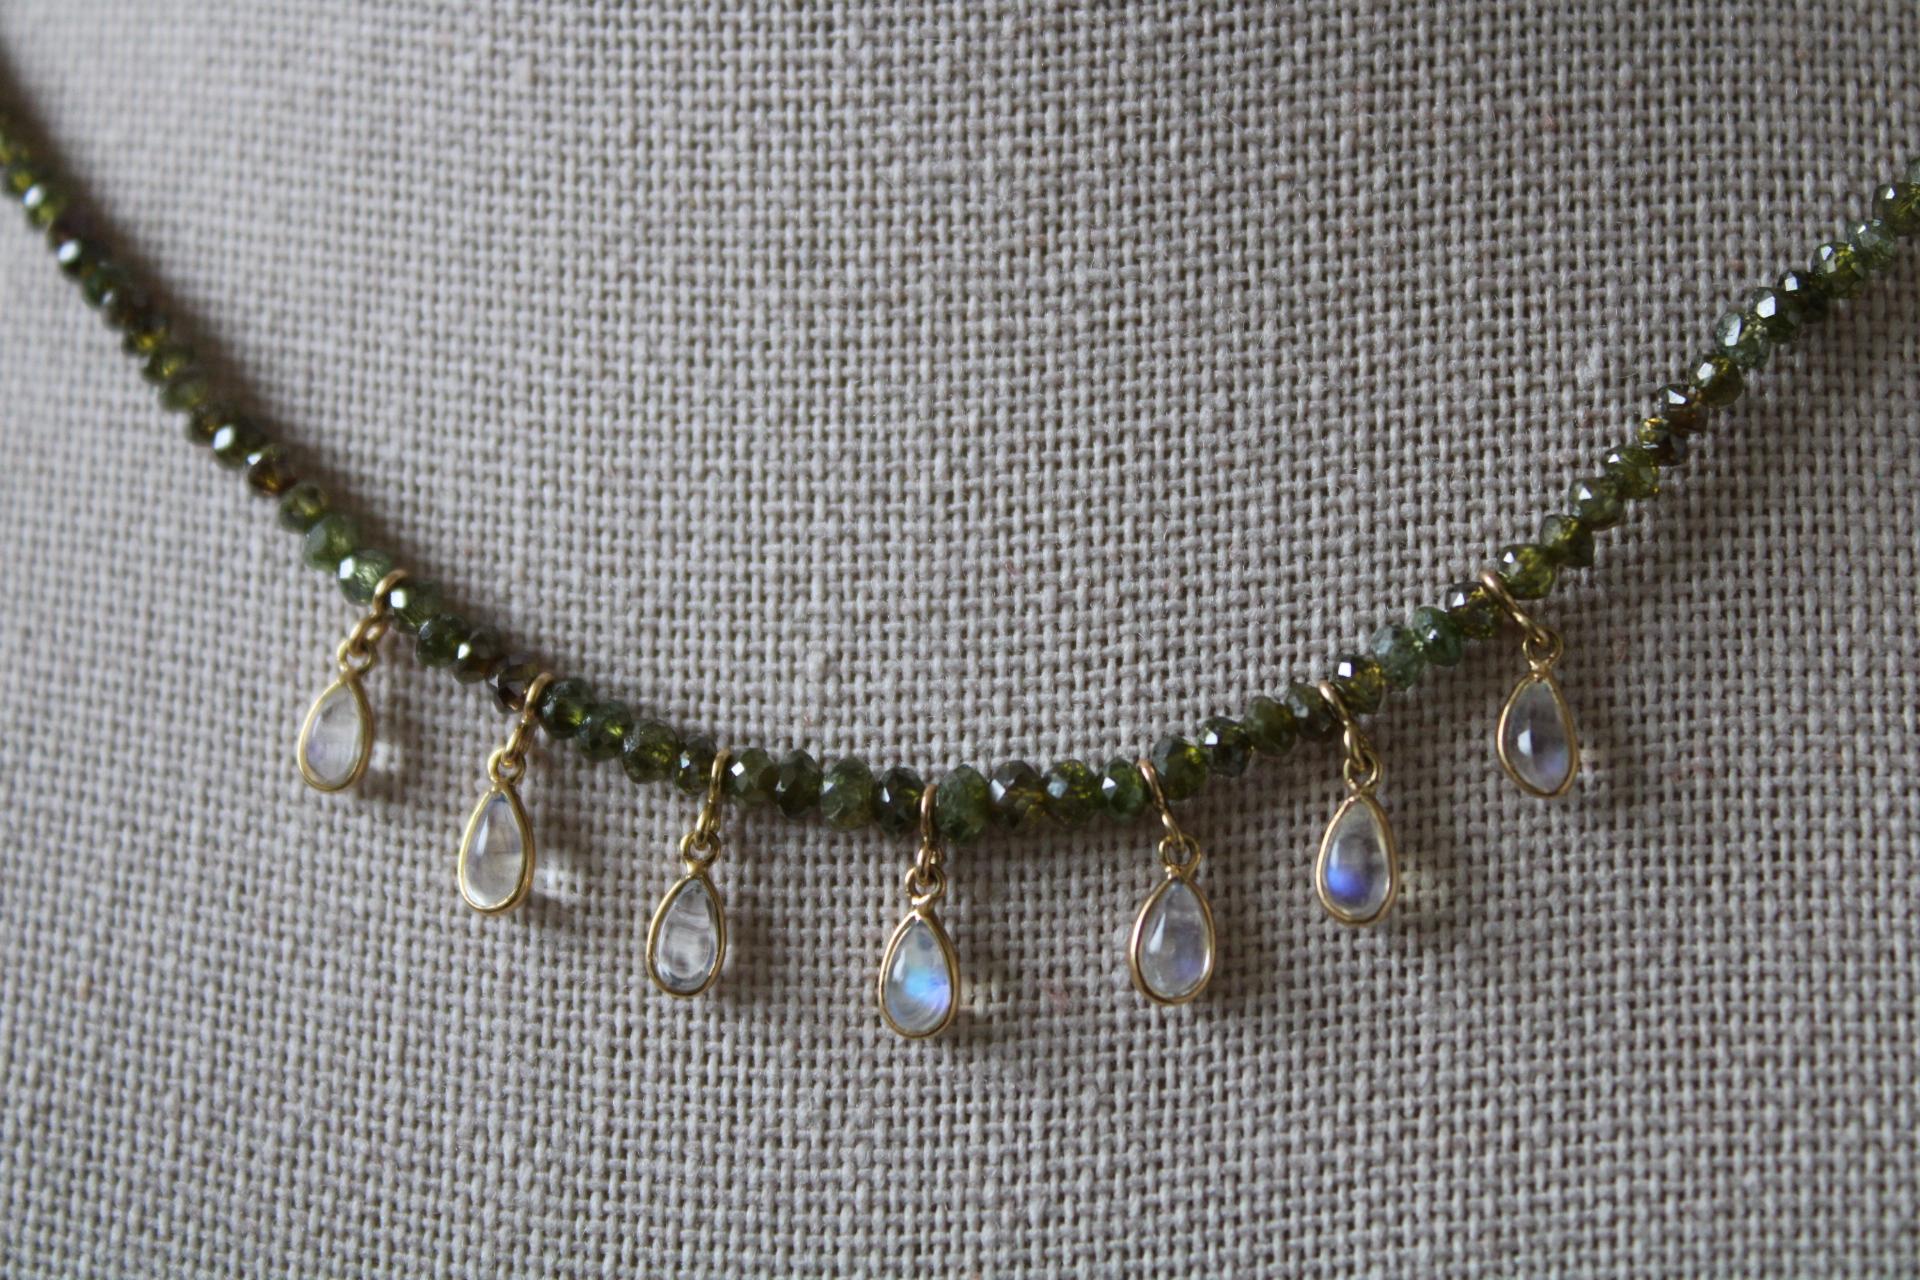 16.28 Carat Diamond Bead 18K Gold Necklace with Rainbow Moonstone Pears In New Condition For Sale In Amagansett, NY